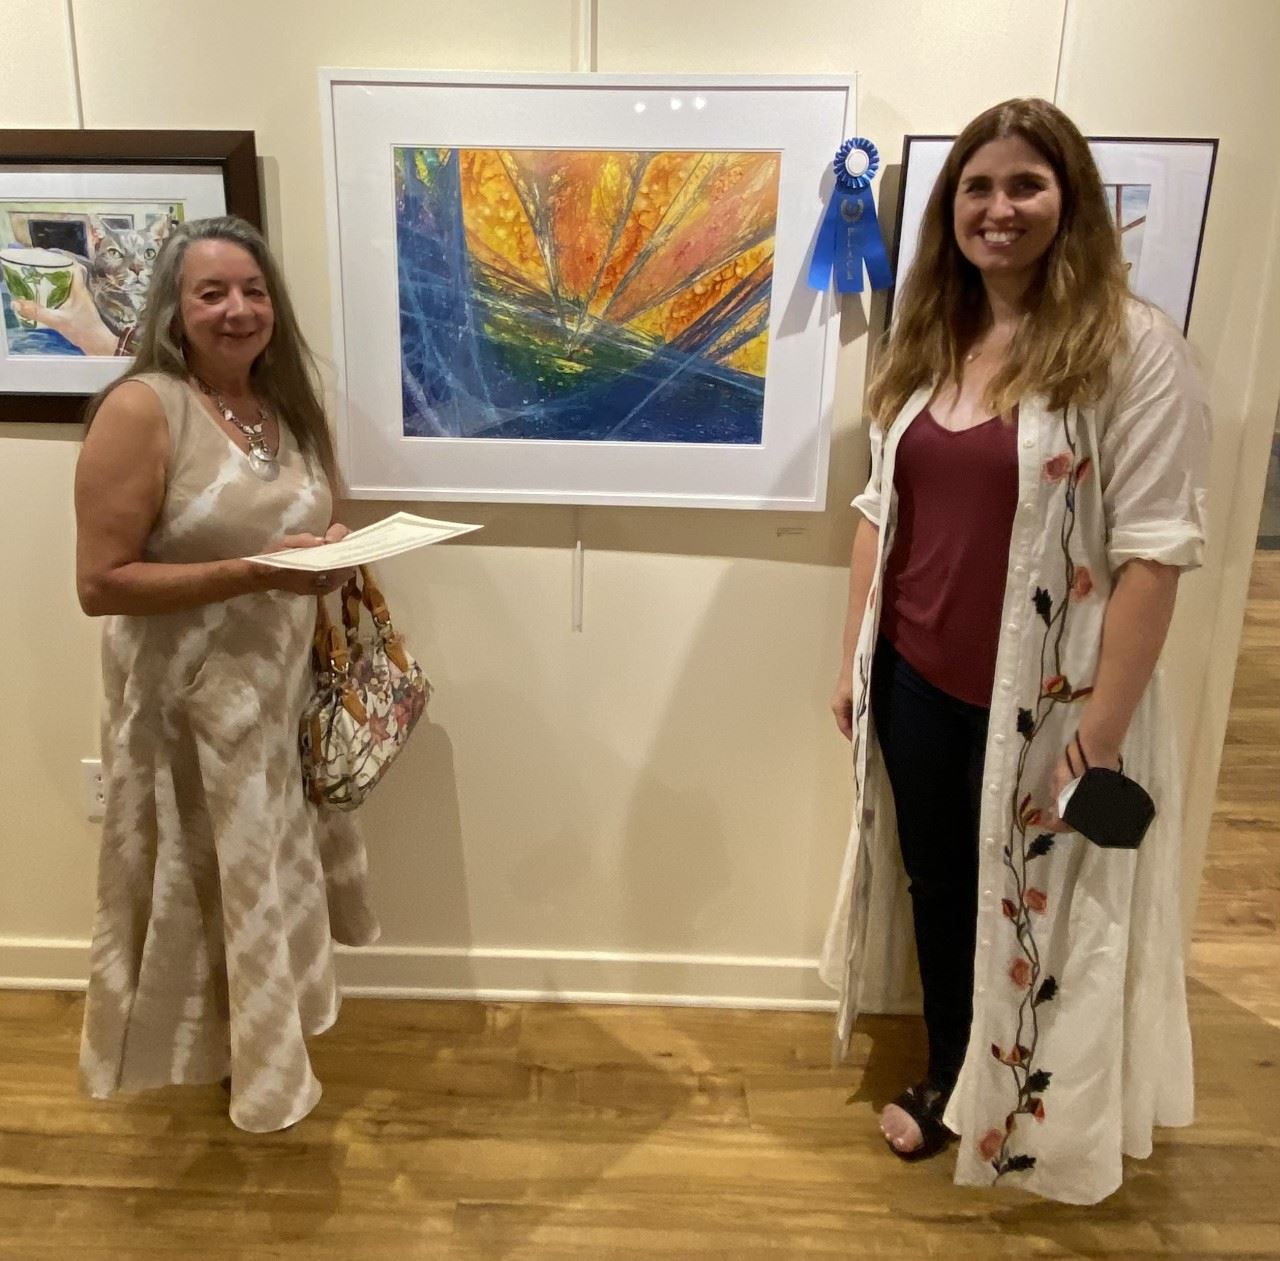 Photo of Artist and Juror standing together with framed painting and blue ribbon